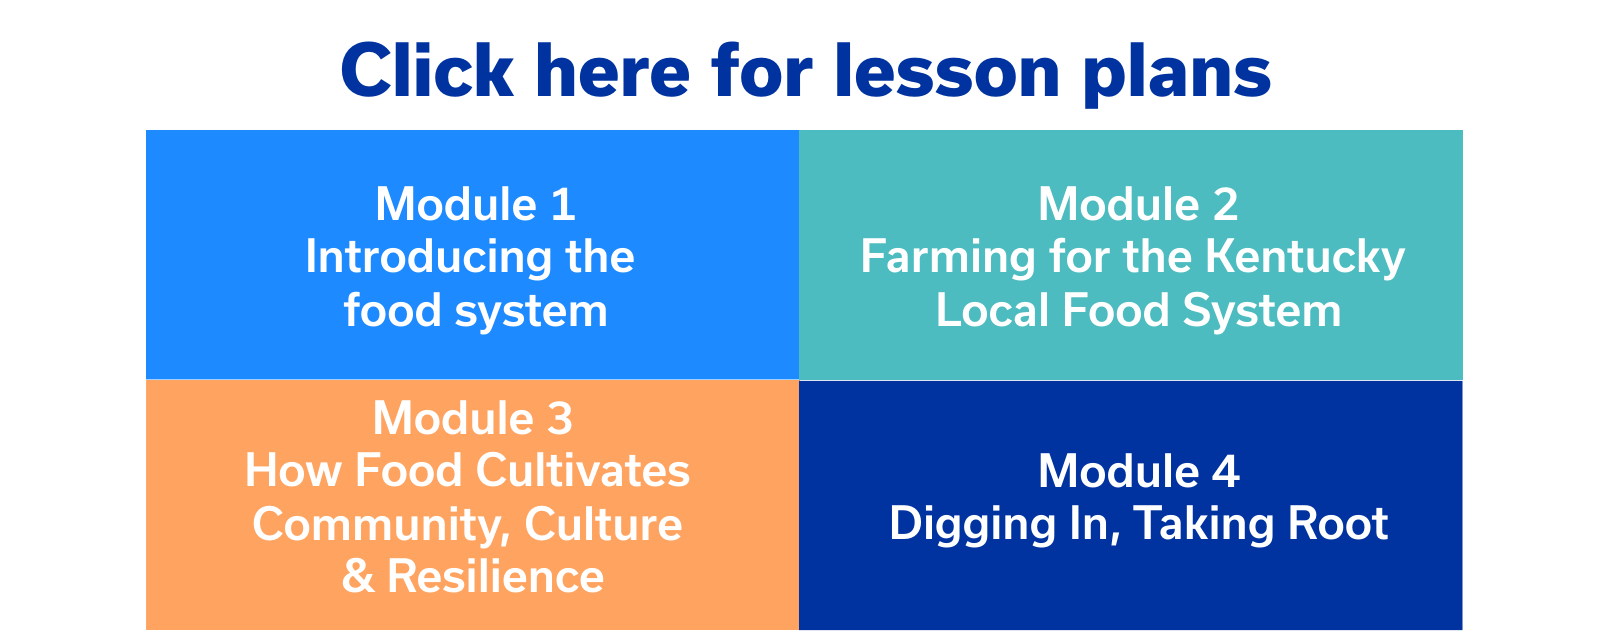 Lesson Plan Link Graphic